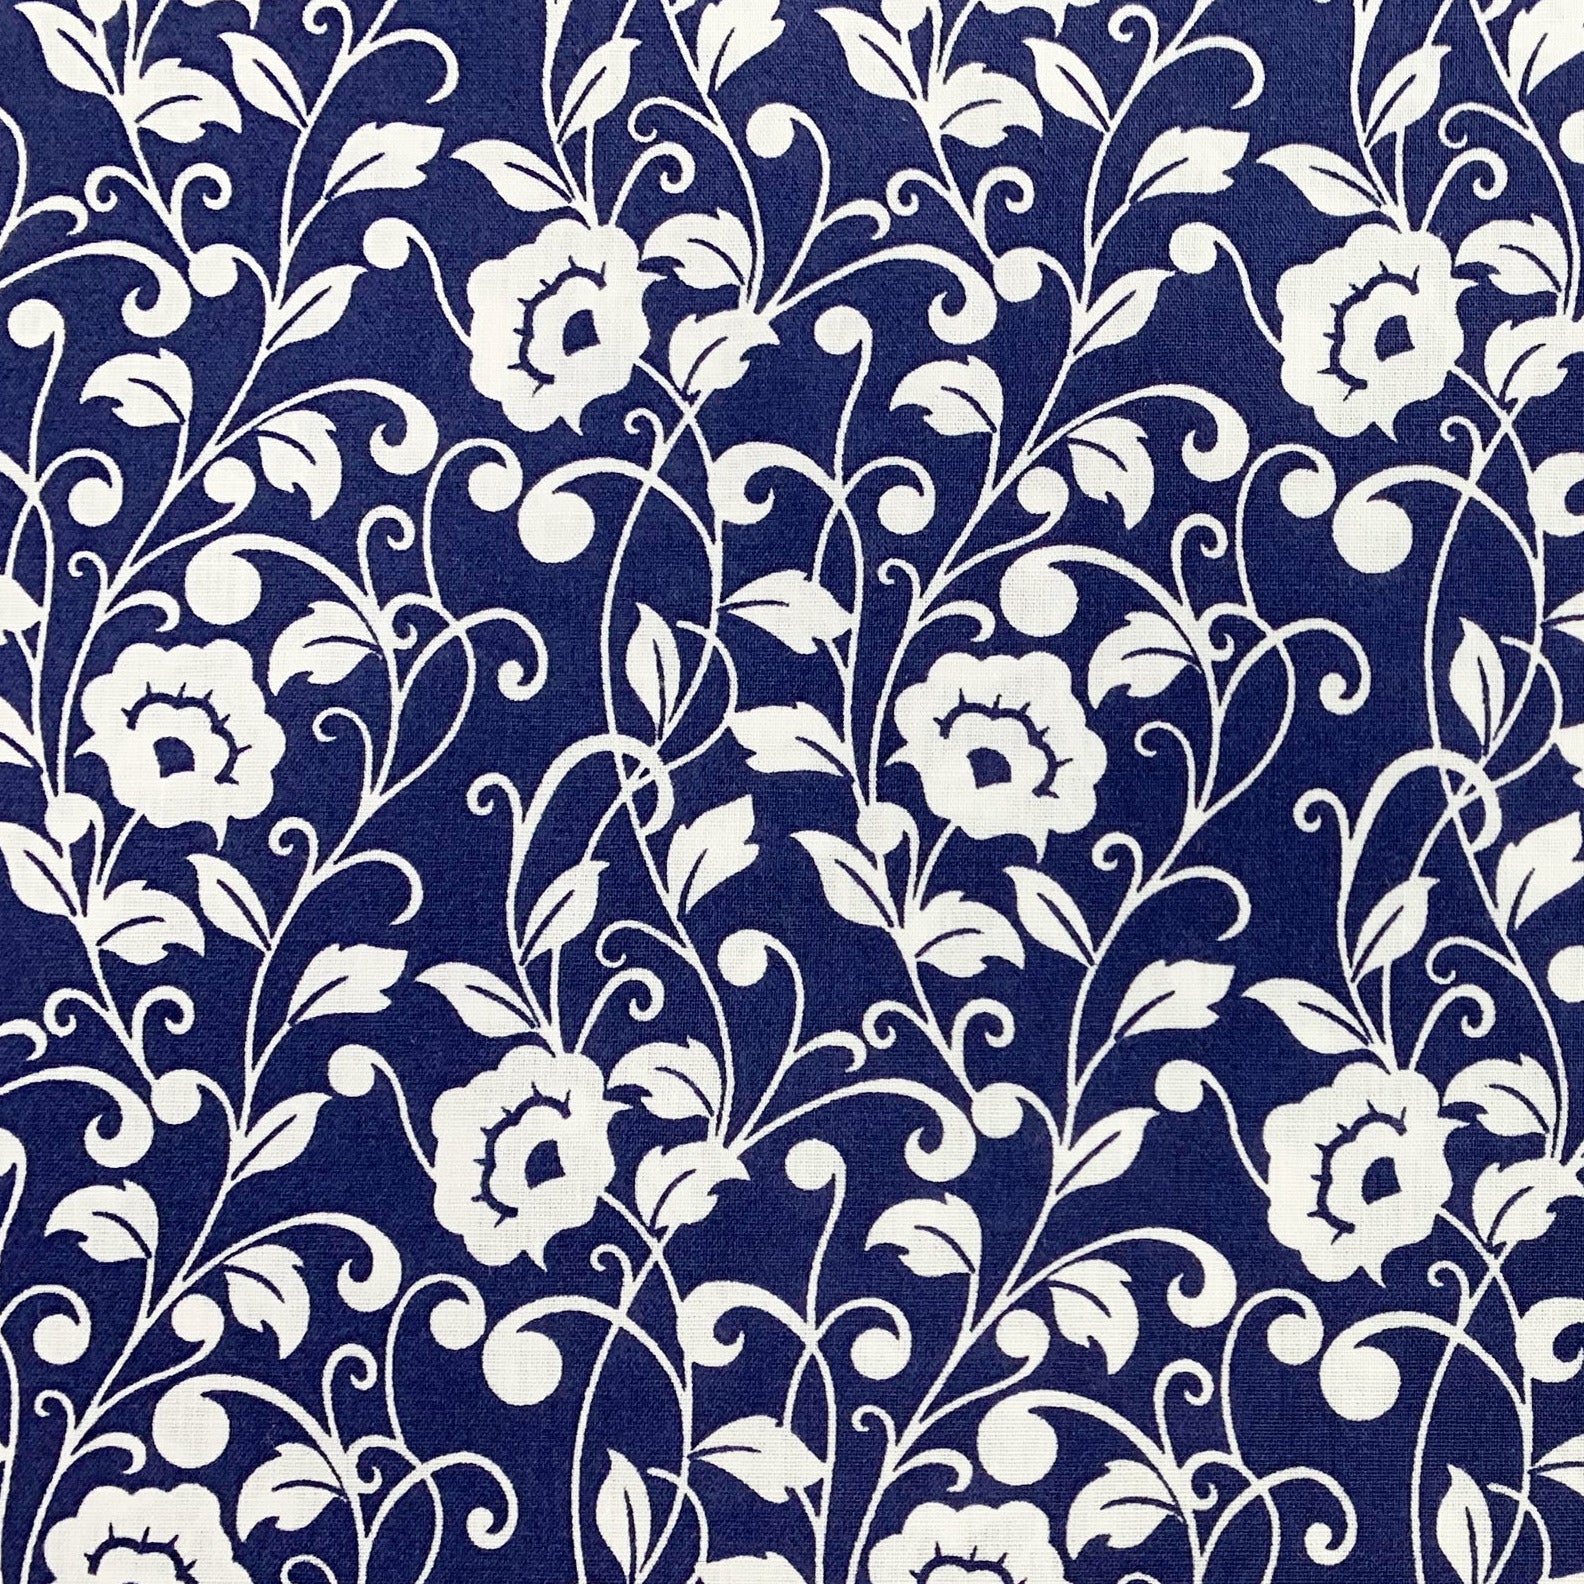 Navy Bouquet Blue Floral Tapestry Upholstery Fabric by The Yard